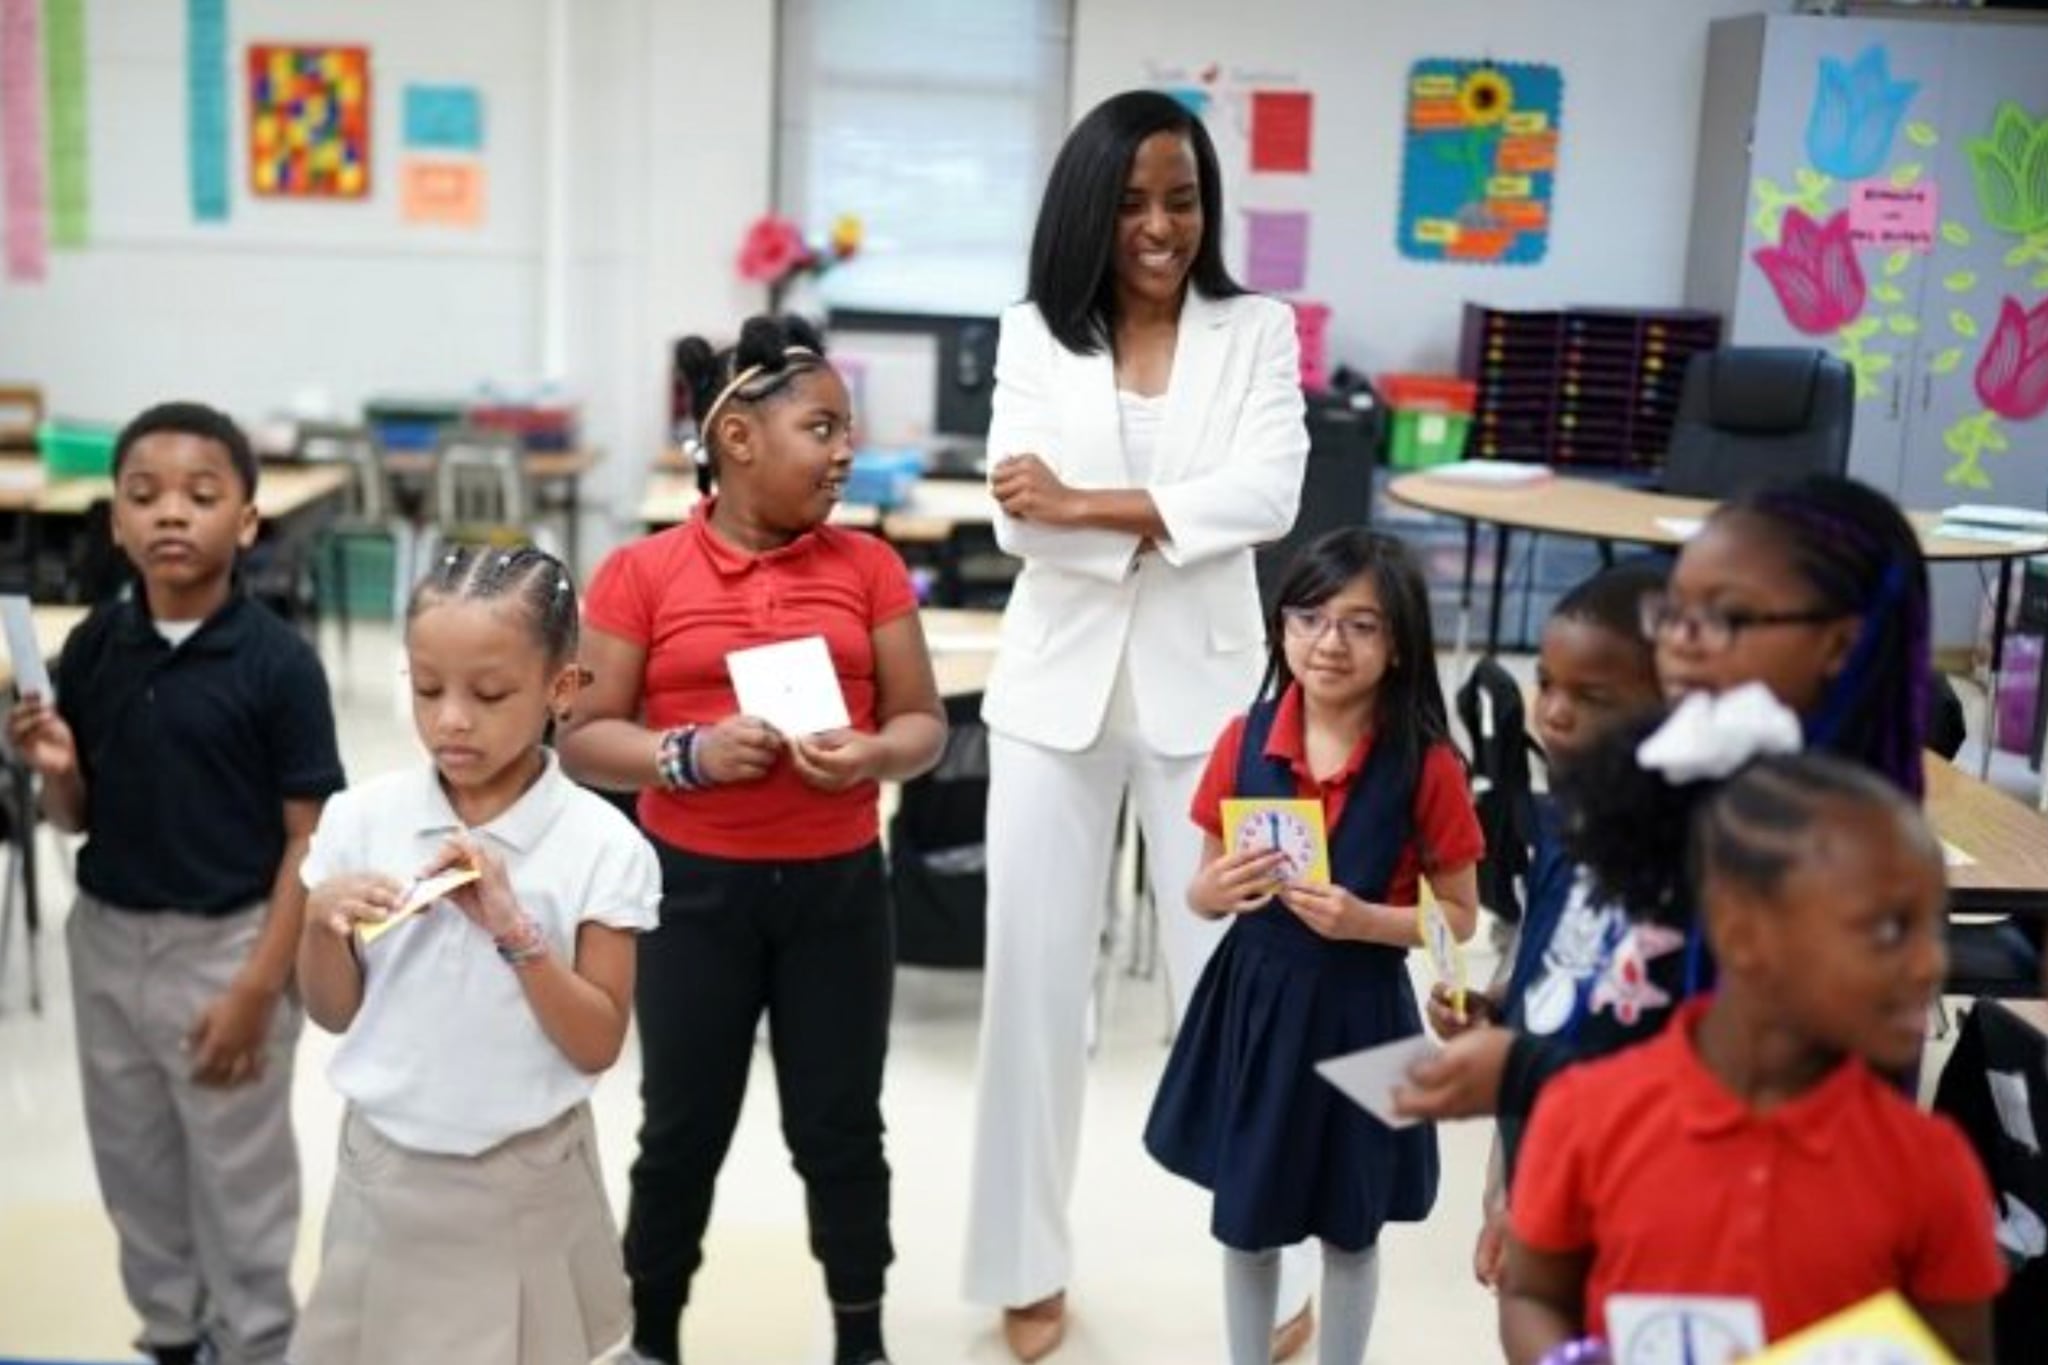 An adult woman wearing an all white suit stands in a classroom next to a group of young elementary students.